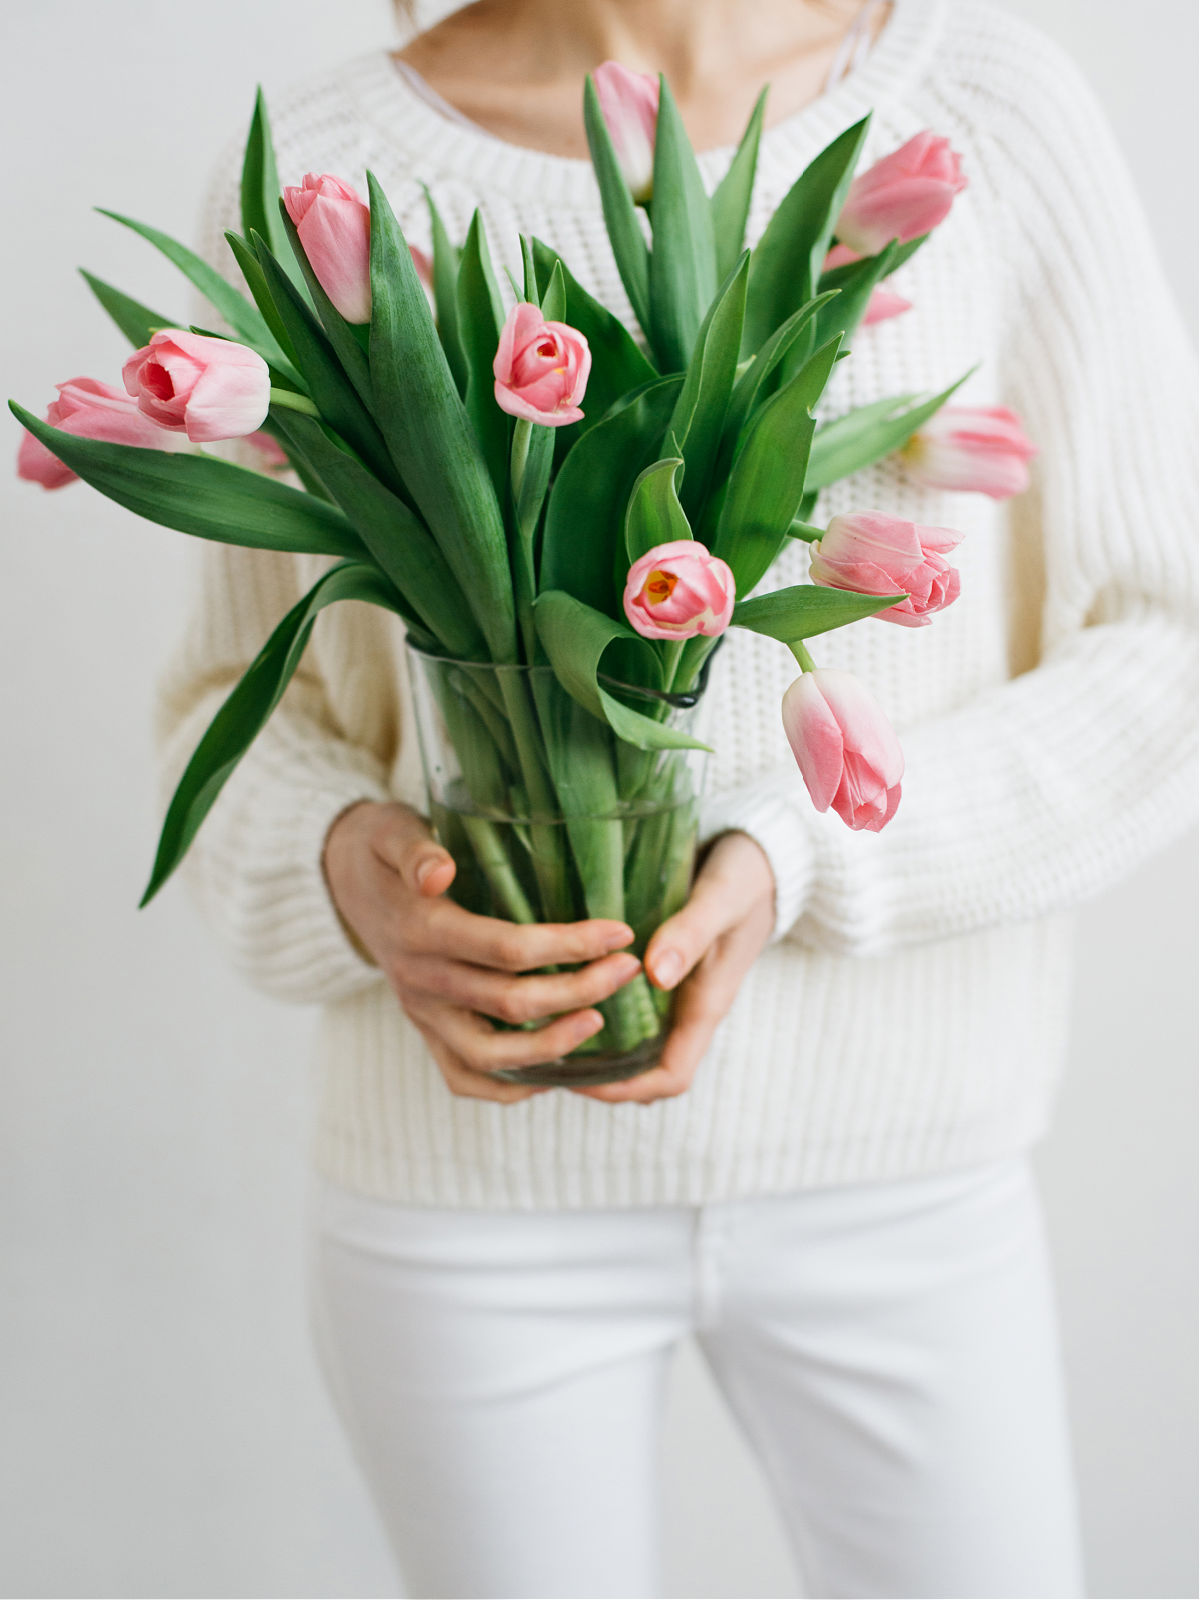 A woman holding a vase filled with spring tulips.